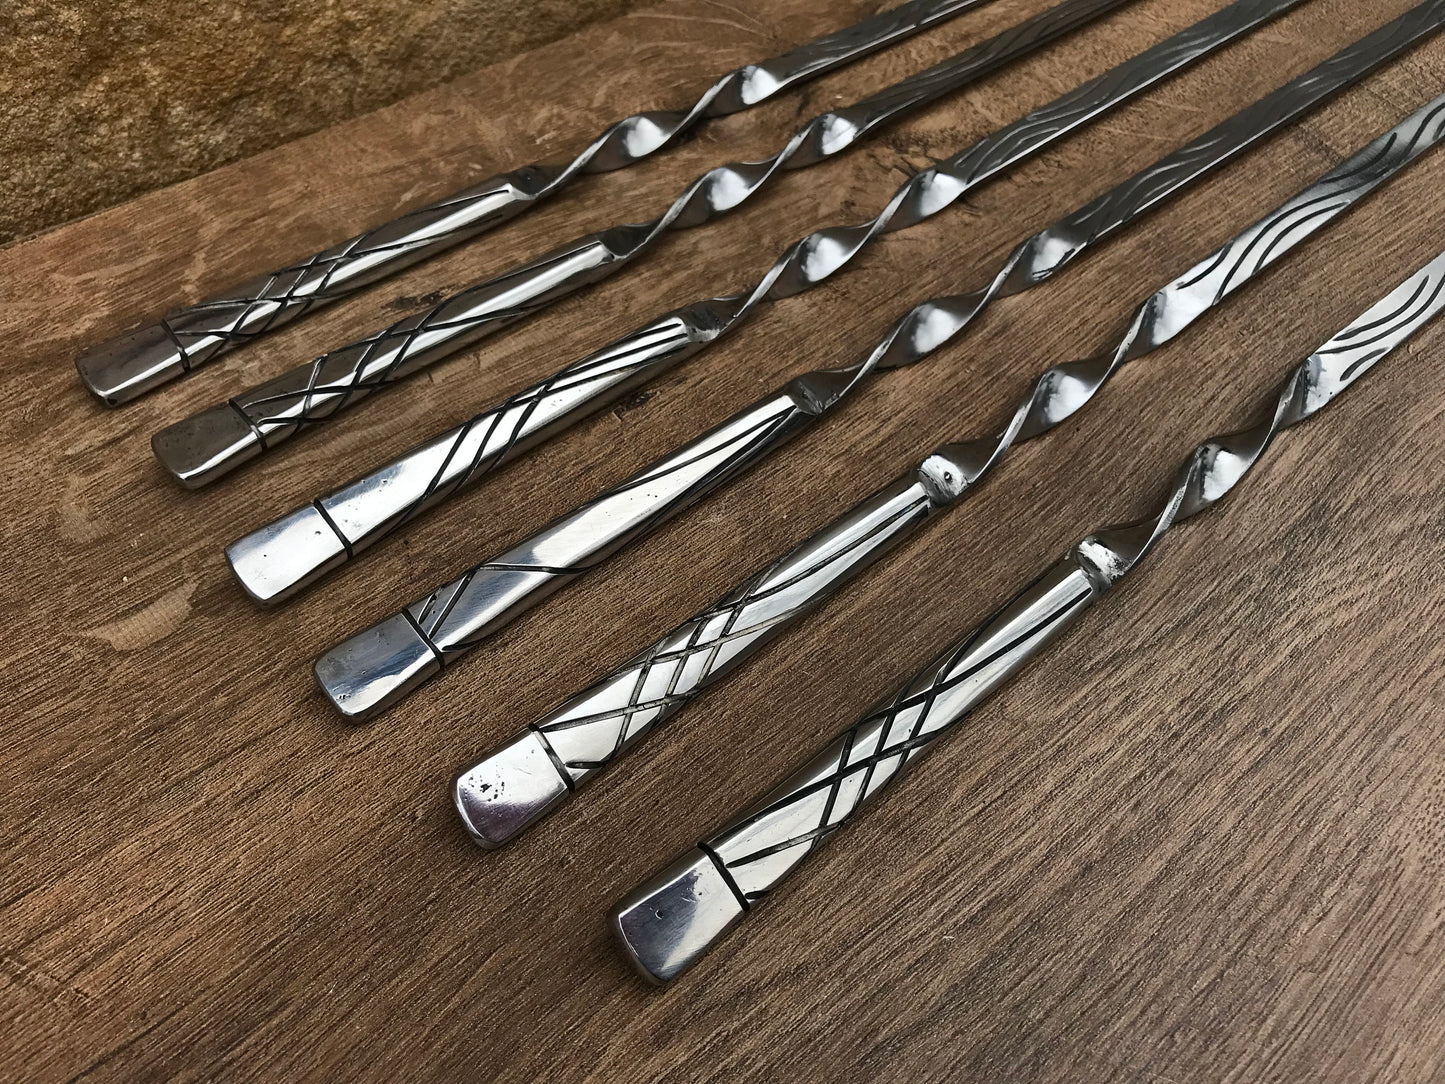 11th anniversary, skewers, gift for Dad, gift for grandpa, steel anniversary, mens jewelry, camping fire, Christmas gift, camping gifts, BBQ